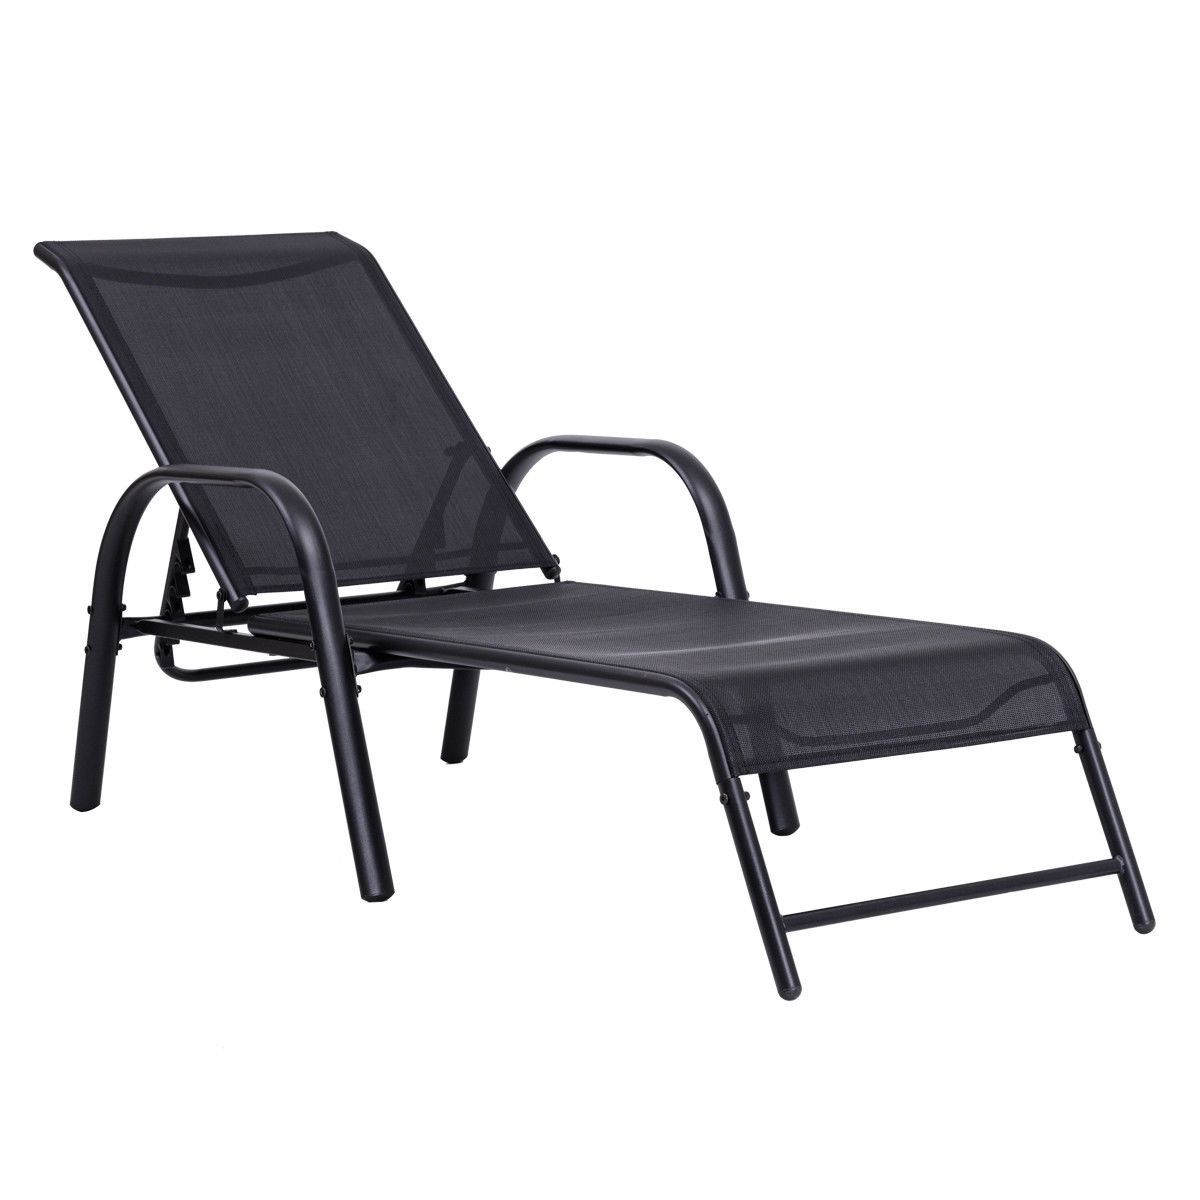 Adjustable Sling Fabric Patio Chaise Lounges For Well Known Outdoor Patio Chaise Lounge Chair Sling Lounge Recliner (View 18 of 25)